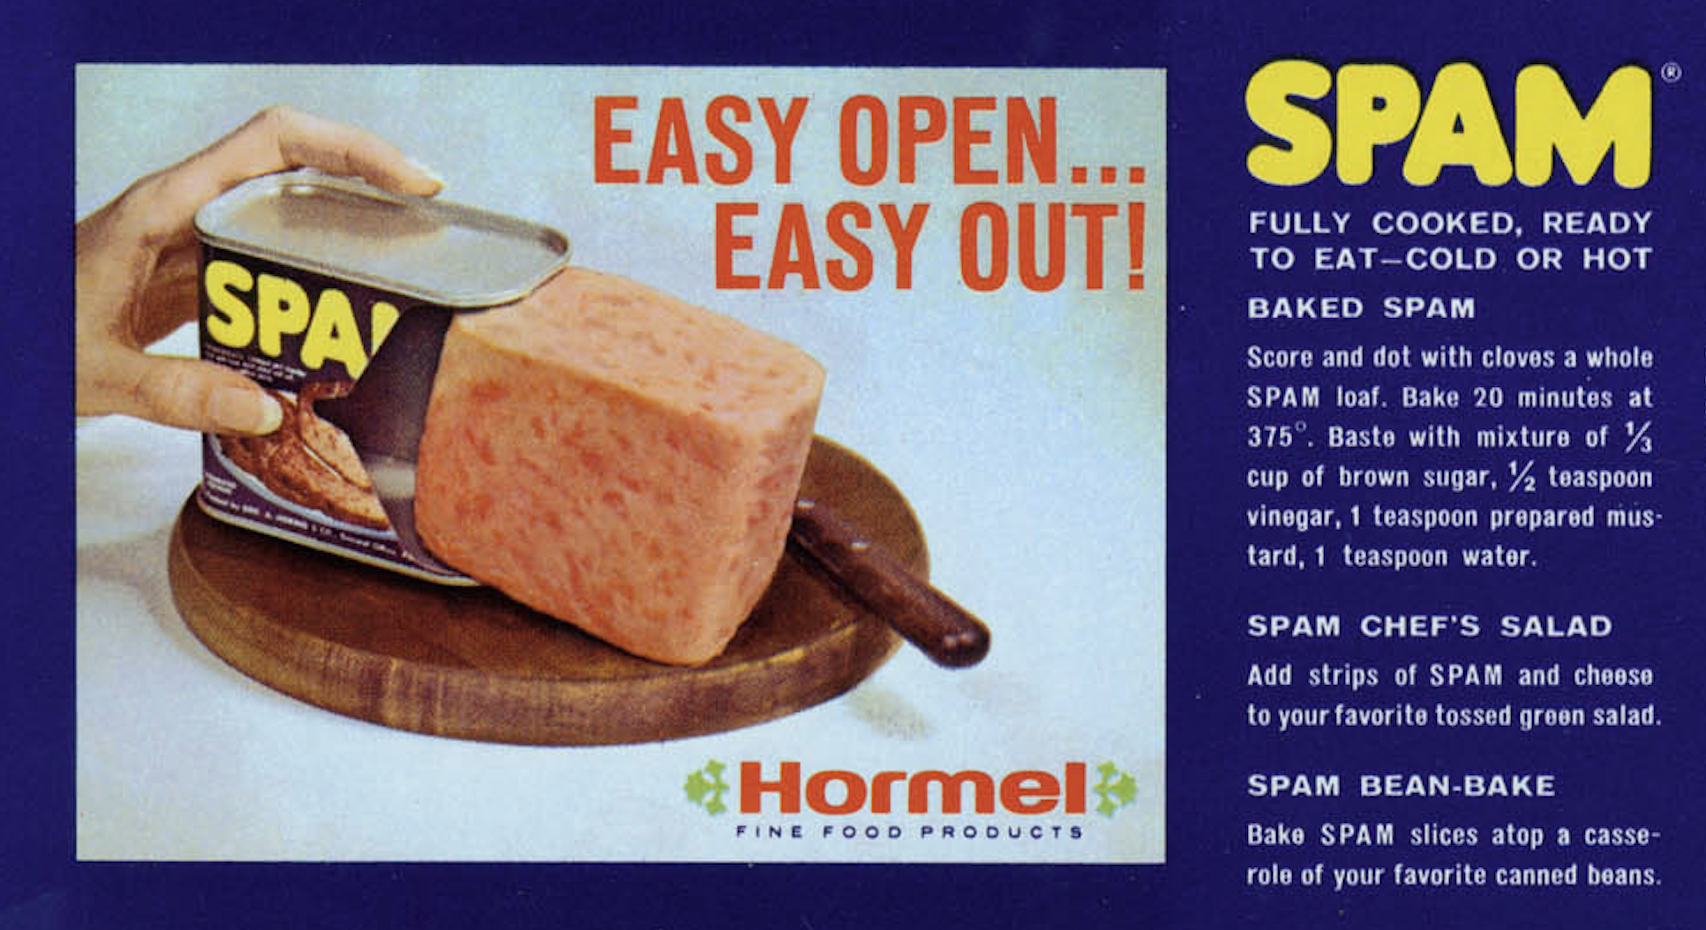 "Post-war, President Eisenhower sent a letter to the Hormel president that basically said, 'Thank you so very much for the hundreds of millions of pounds of product that you sent us during the war. We especially enjoyed having Spam.' It was a tongue-in-cheek way of saying, 'We've had enough.'"